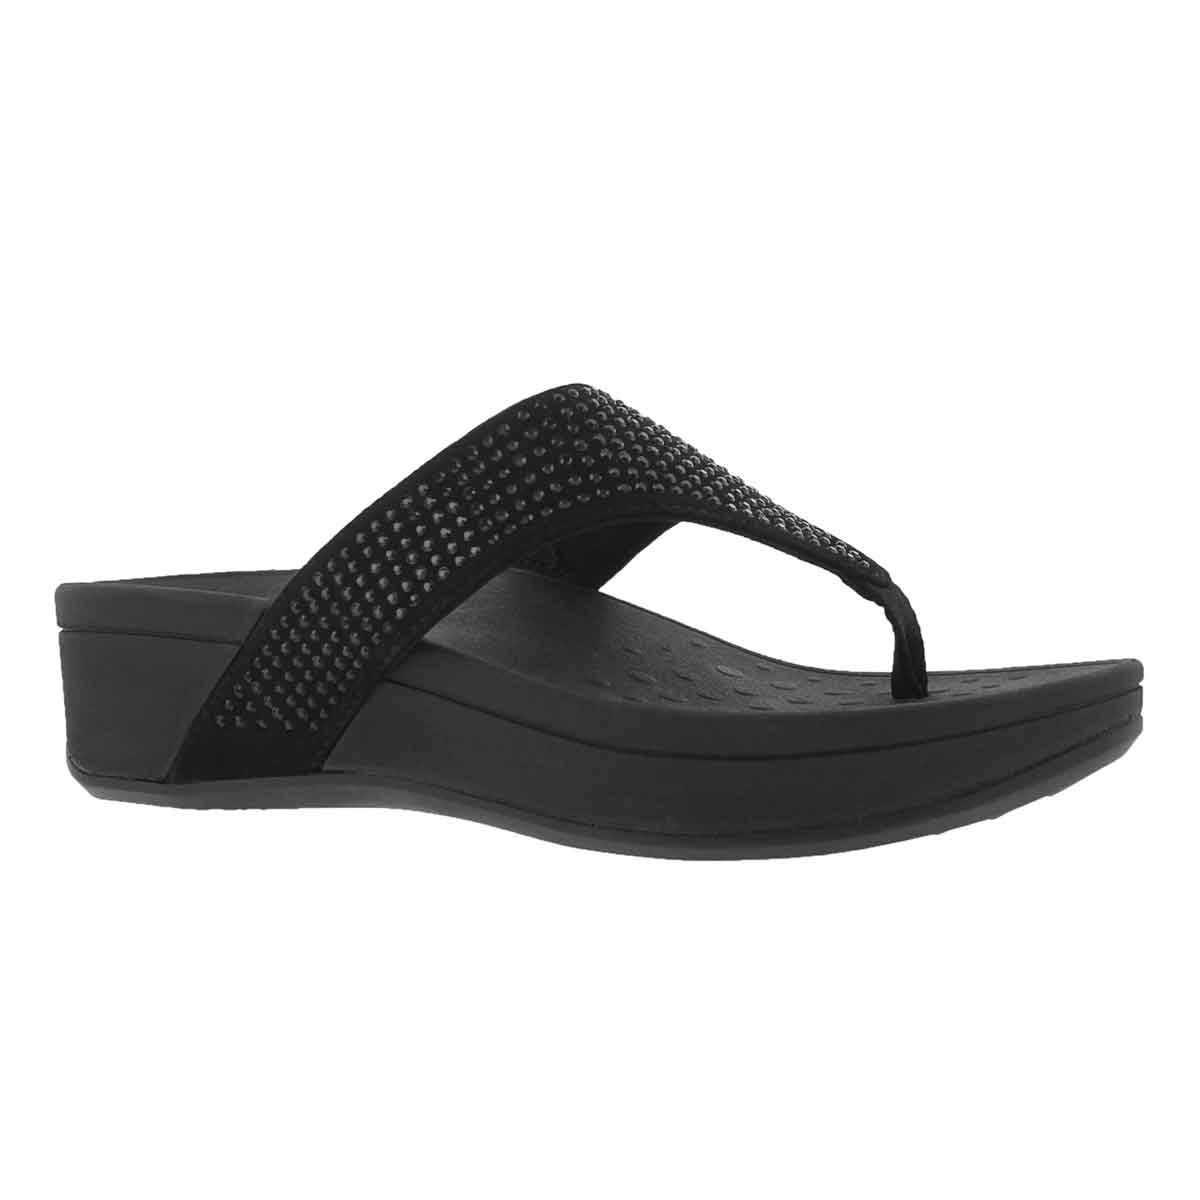 Vionic Women's Naples Arch Support Thong Wedge Sandal | eBay